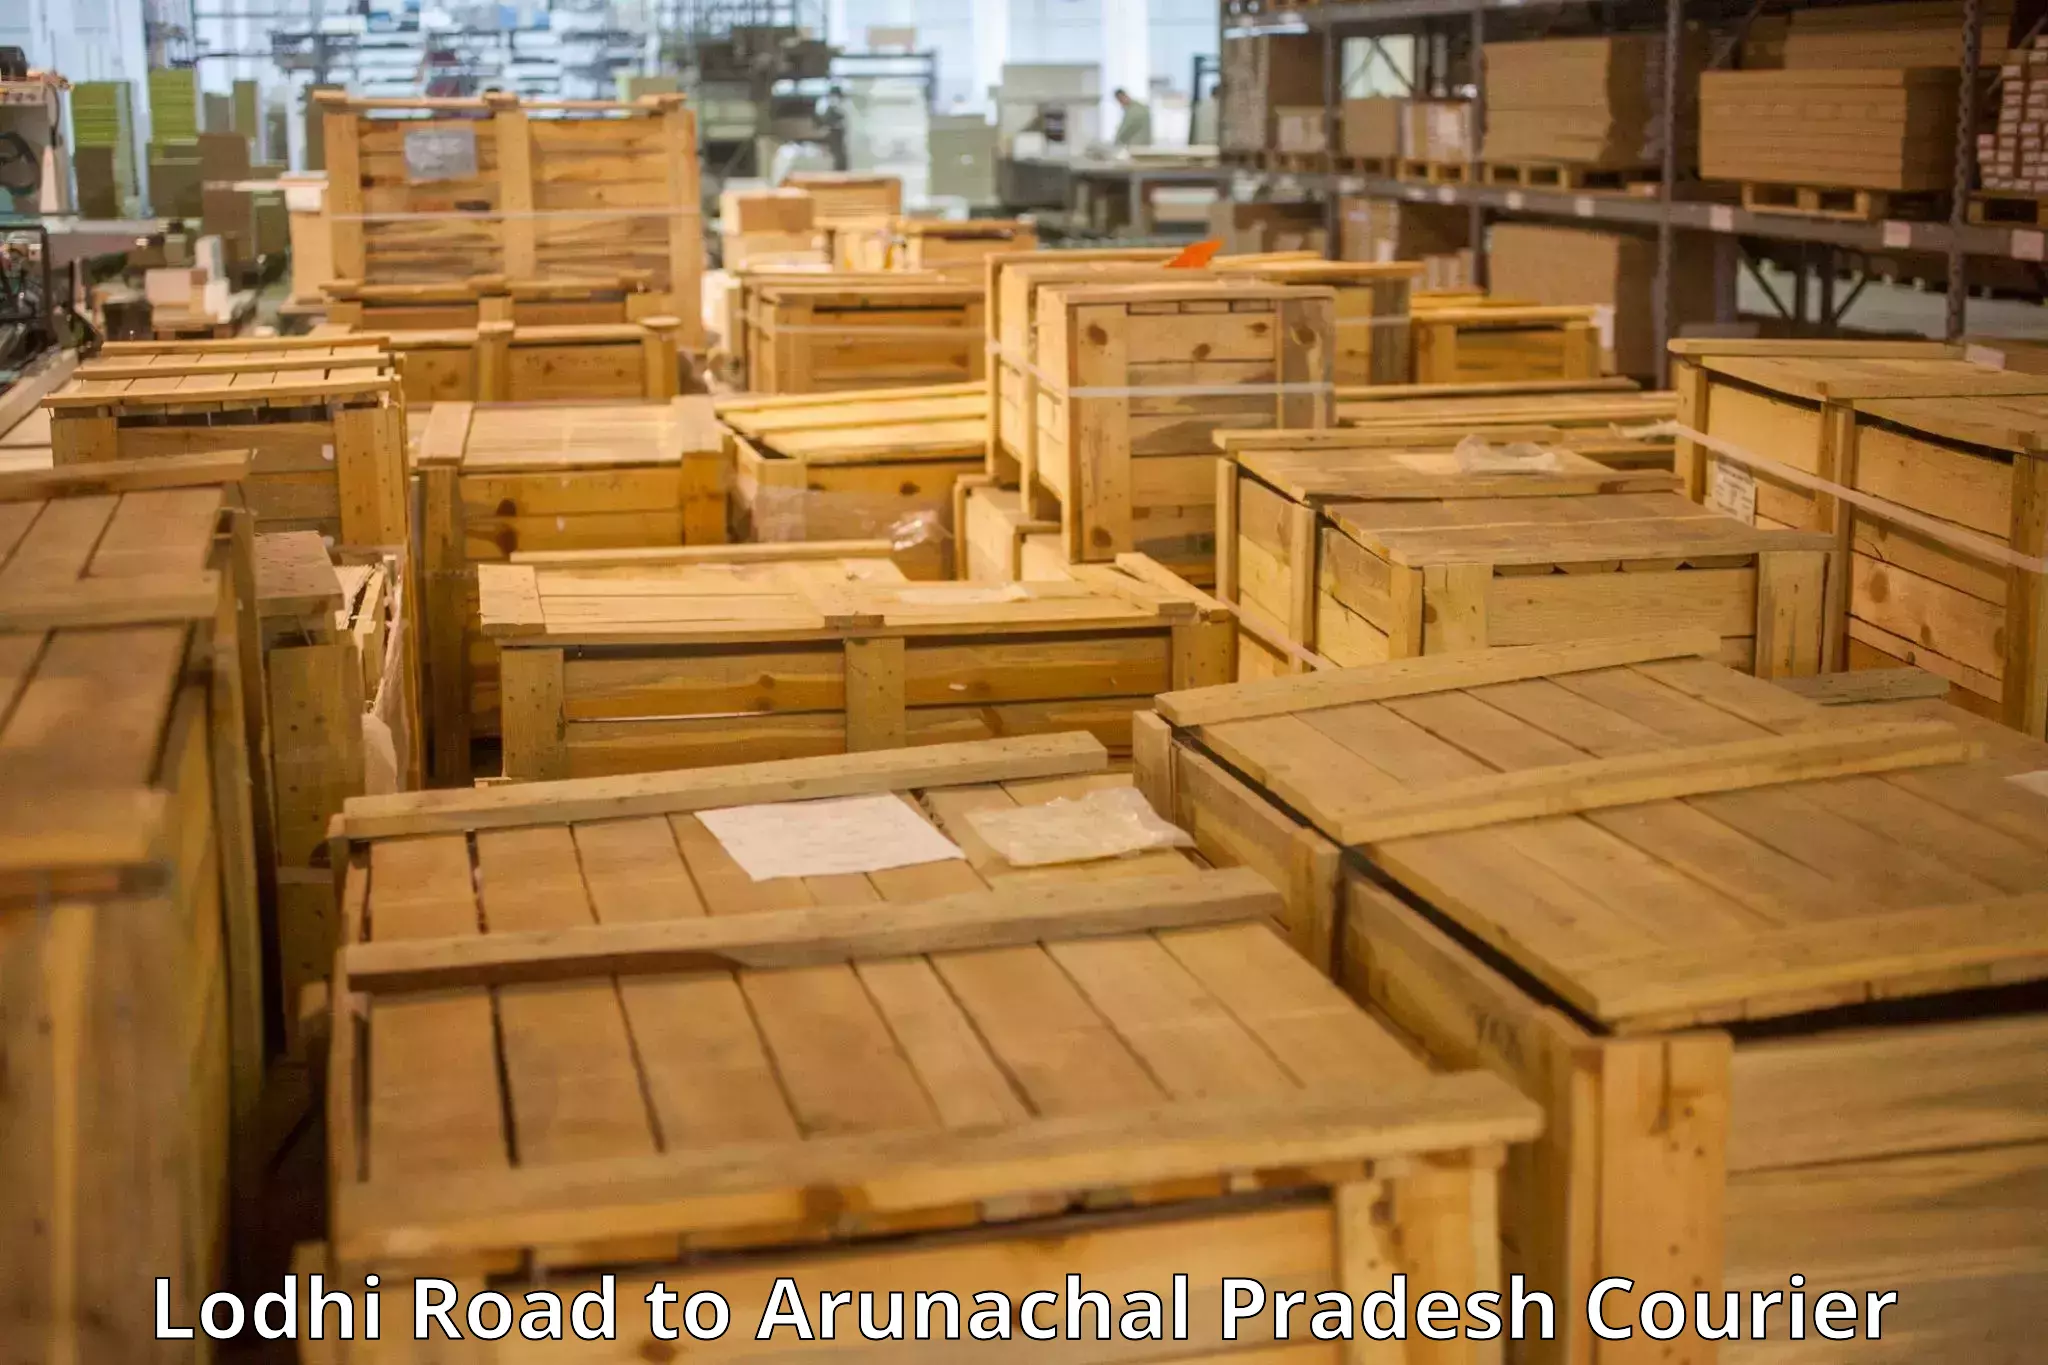 Luggage shipment specialists Lodhi Road to Tezu